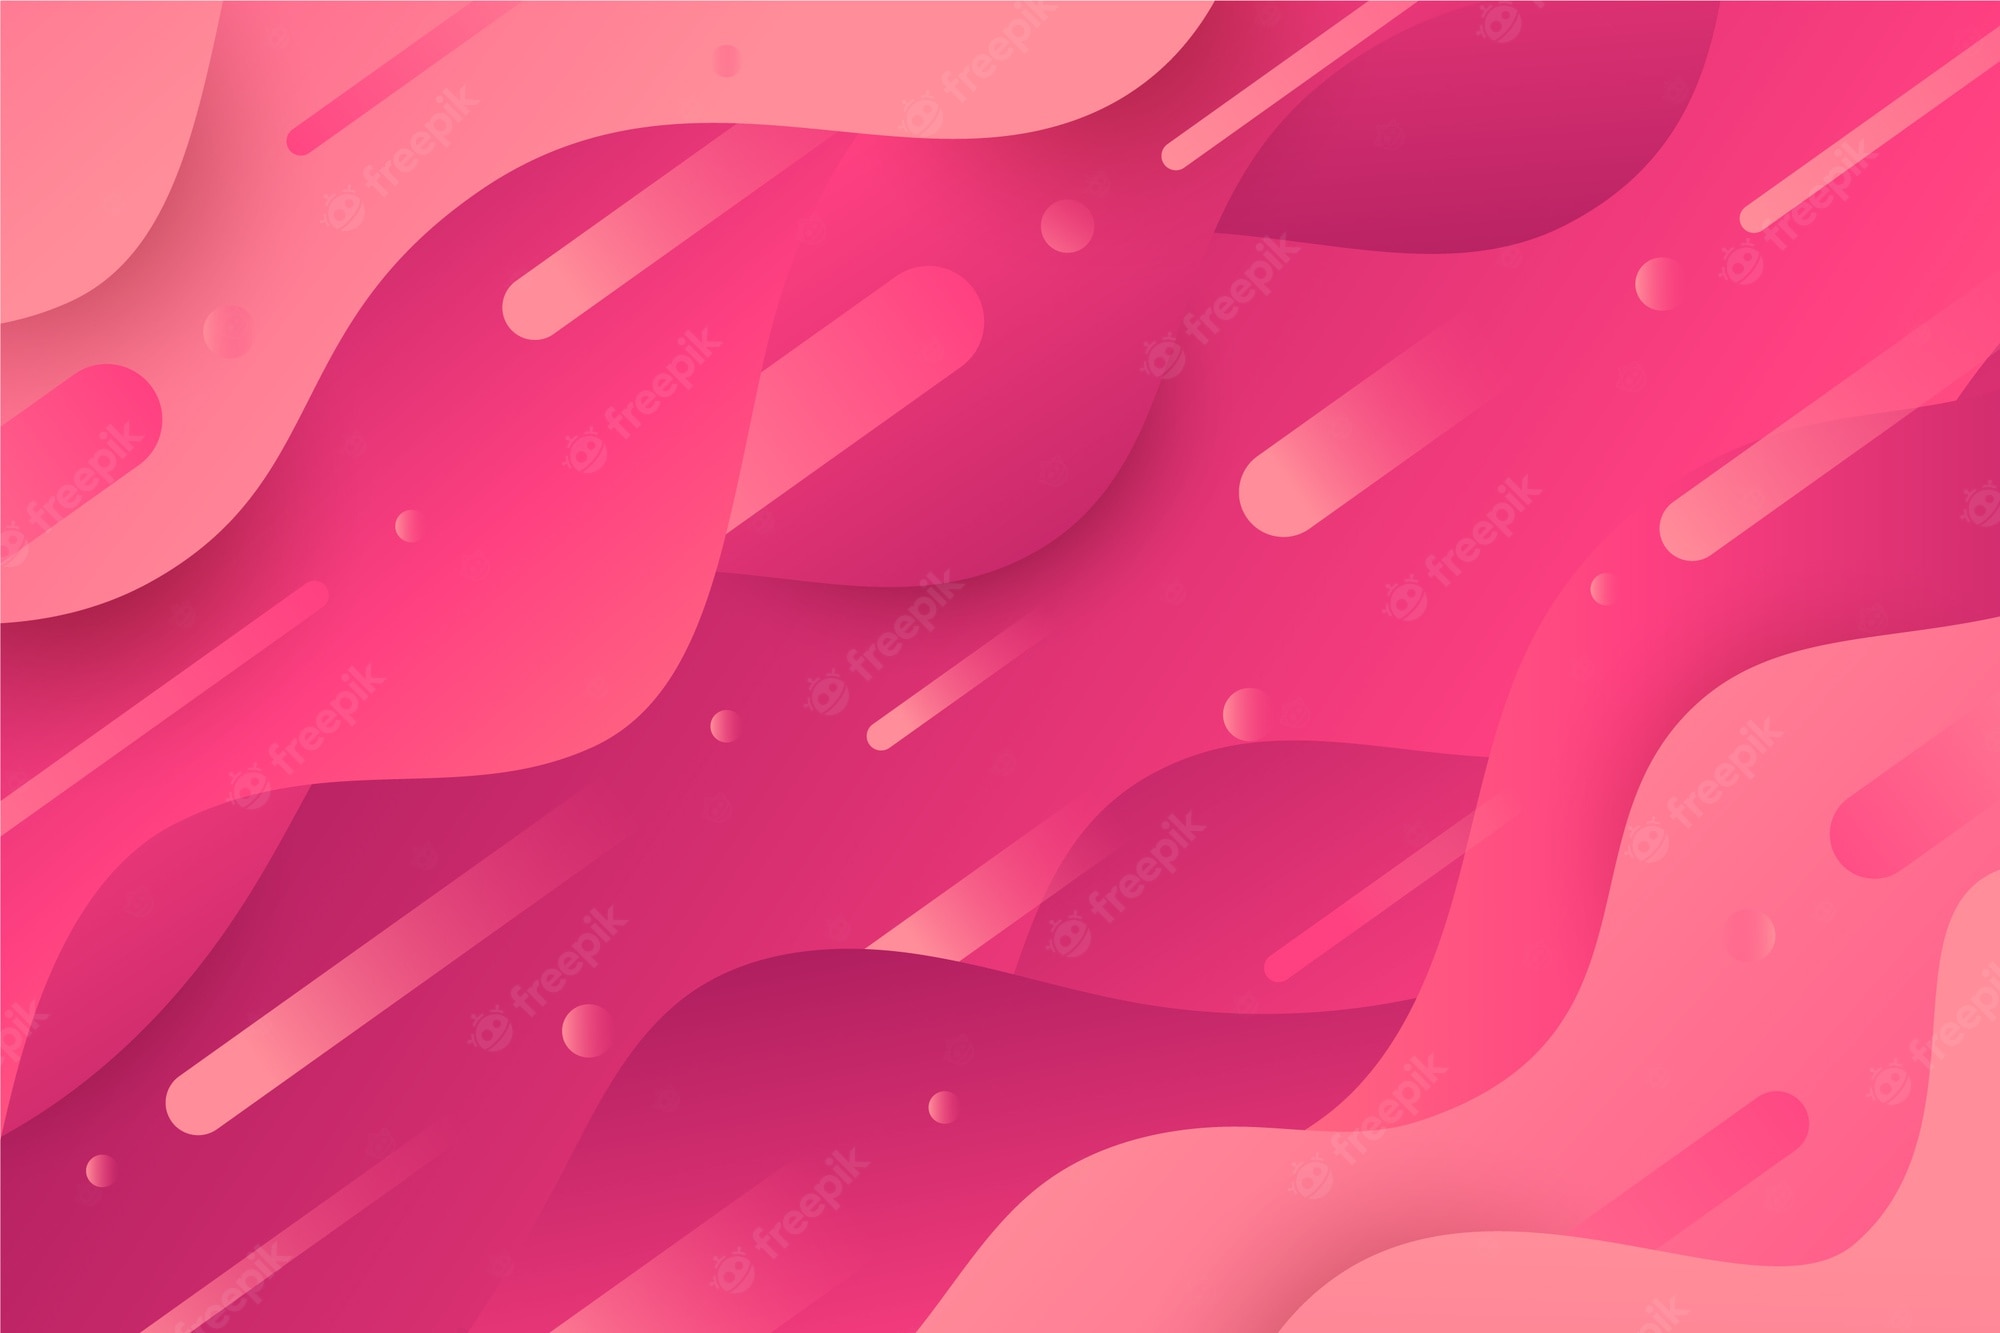 Premium Vector Pink Abstract Background